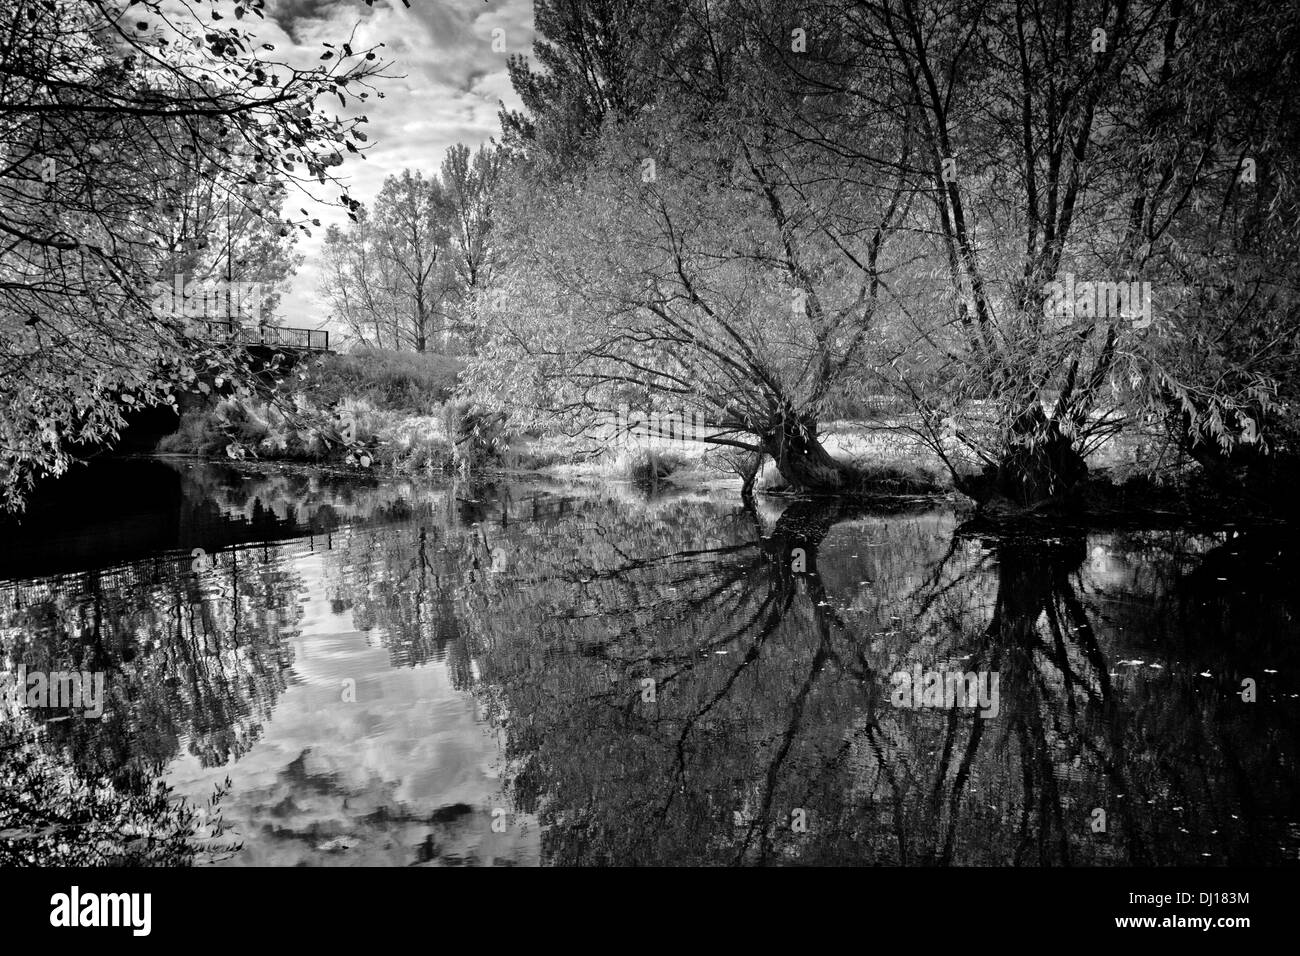 River reflecting trees along The Cherwell River, Oxford, UK Stock Photo